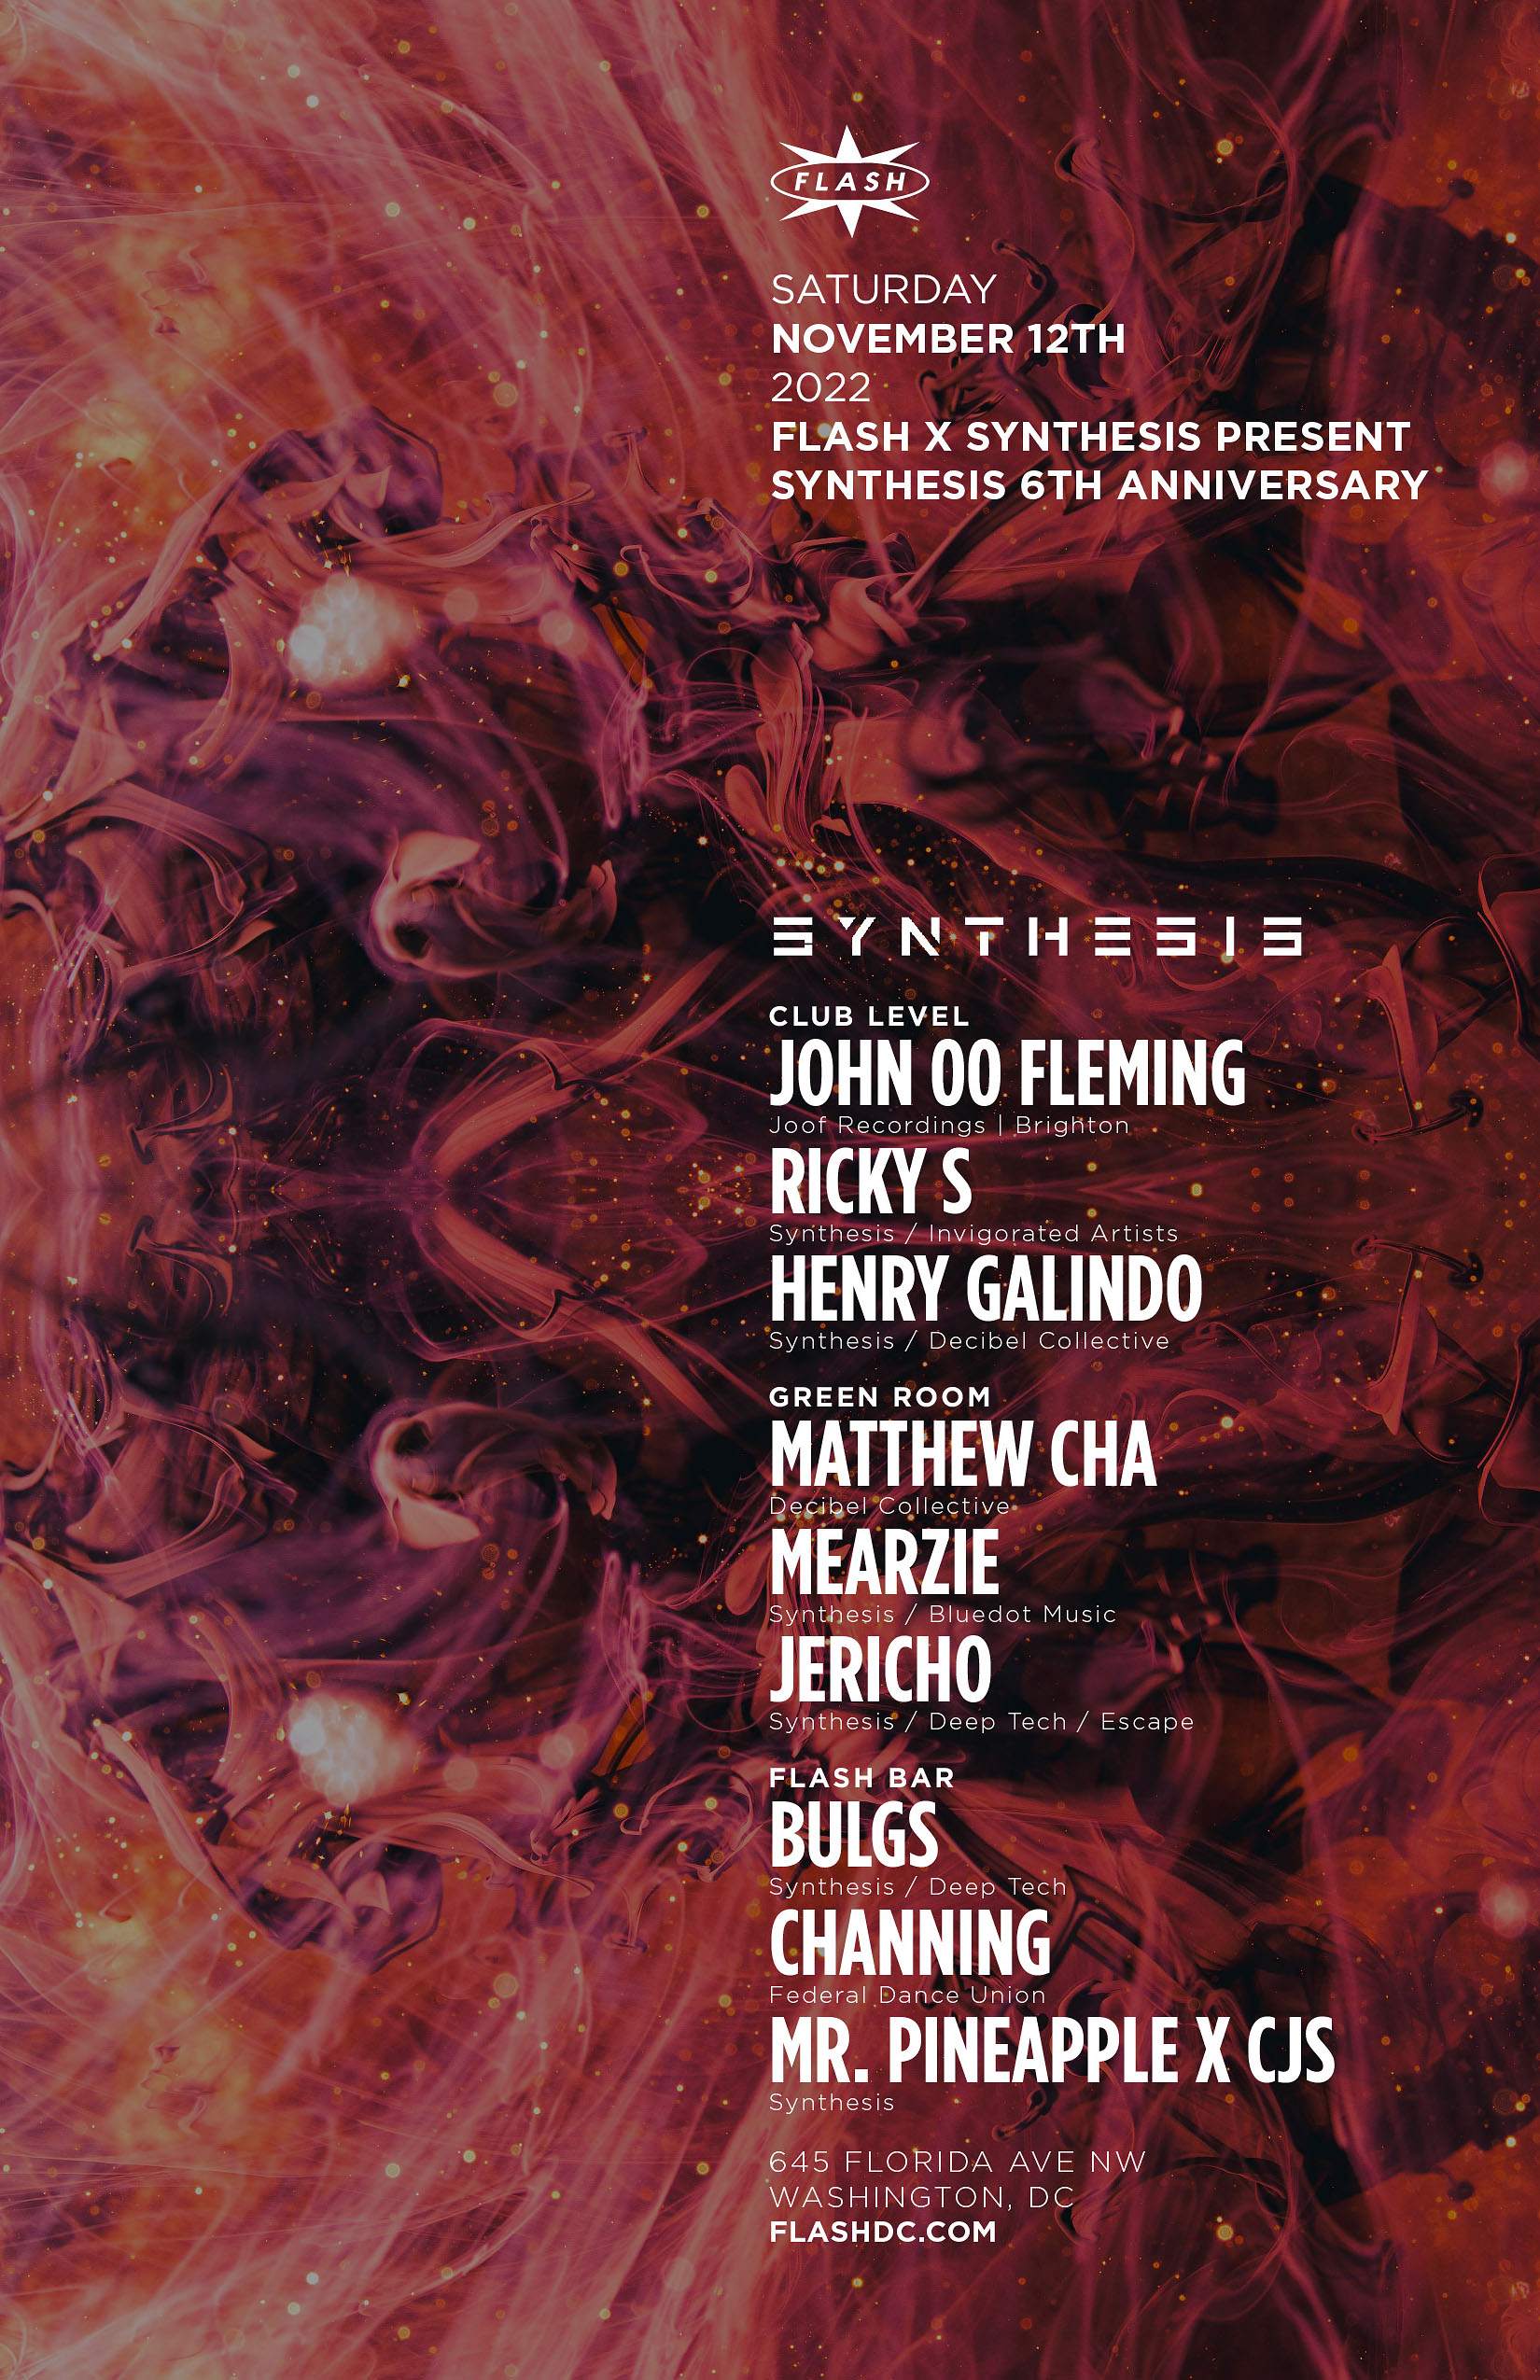 Flash x Synthesis present: John 00 Fleming - Ricky S - Henry - Galindo - フライヤー表